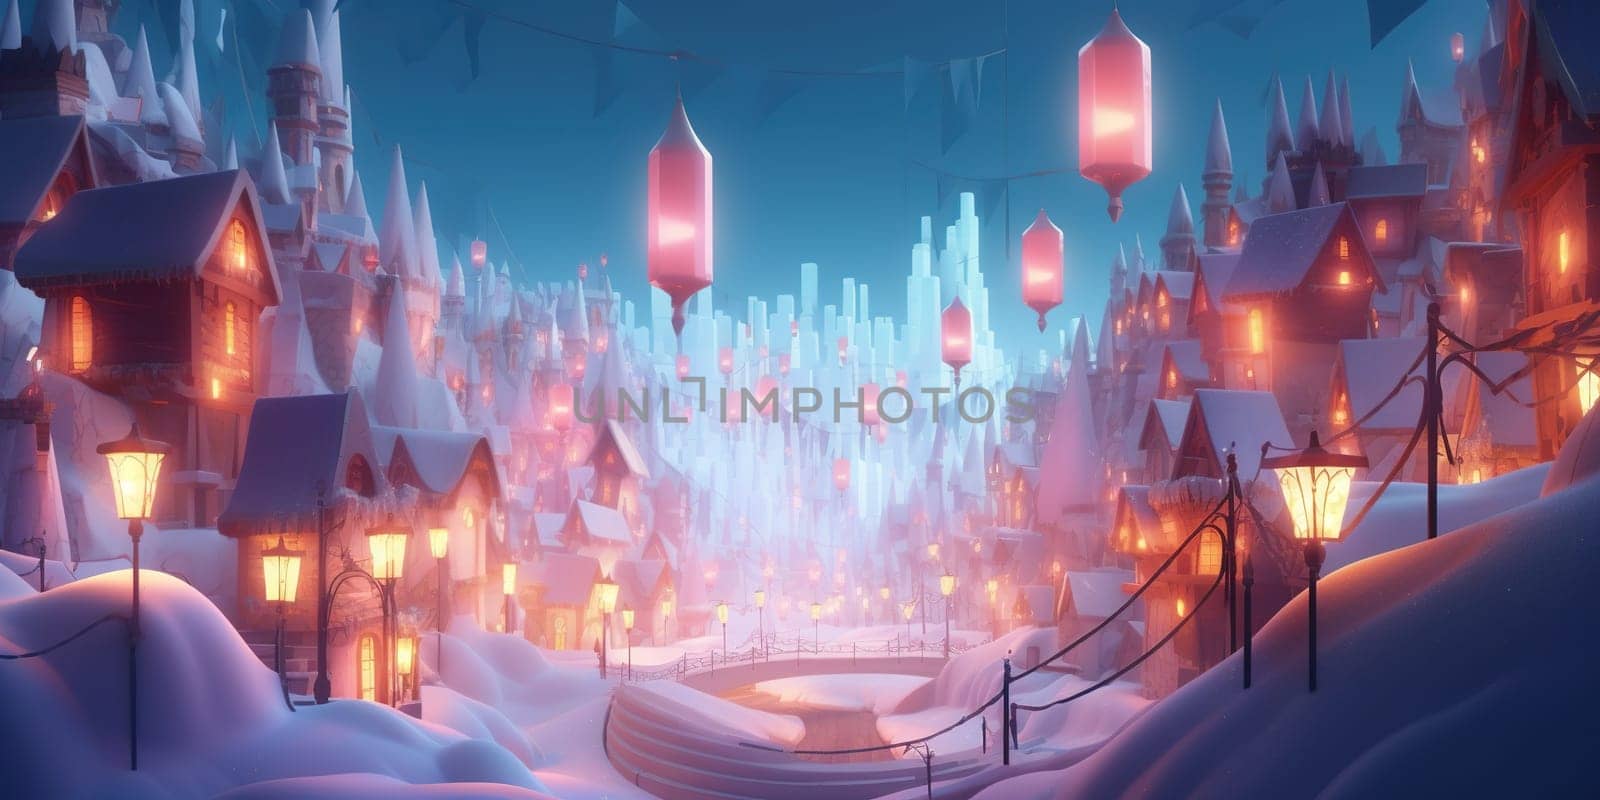 Illuminated Toy Fairy Houses In Snow Make For A Magical Illustration